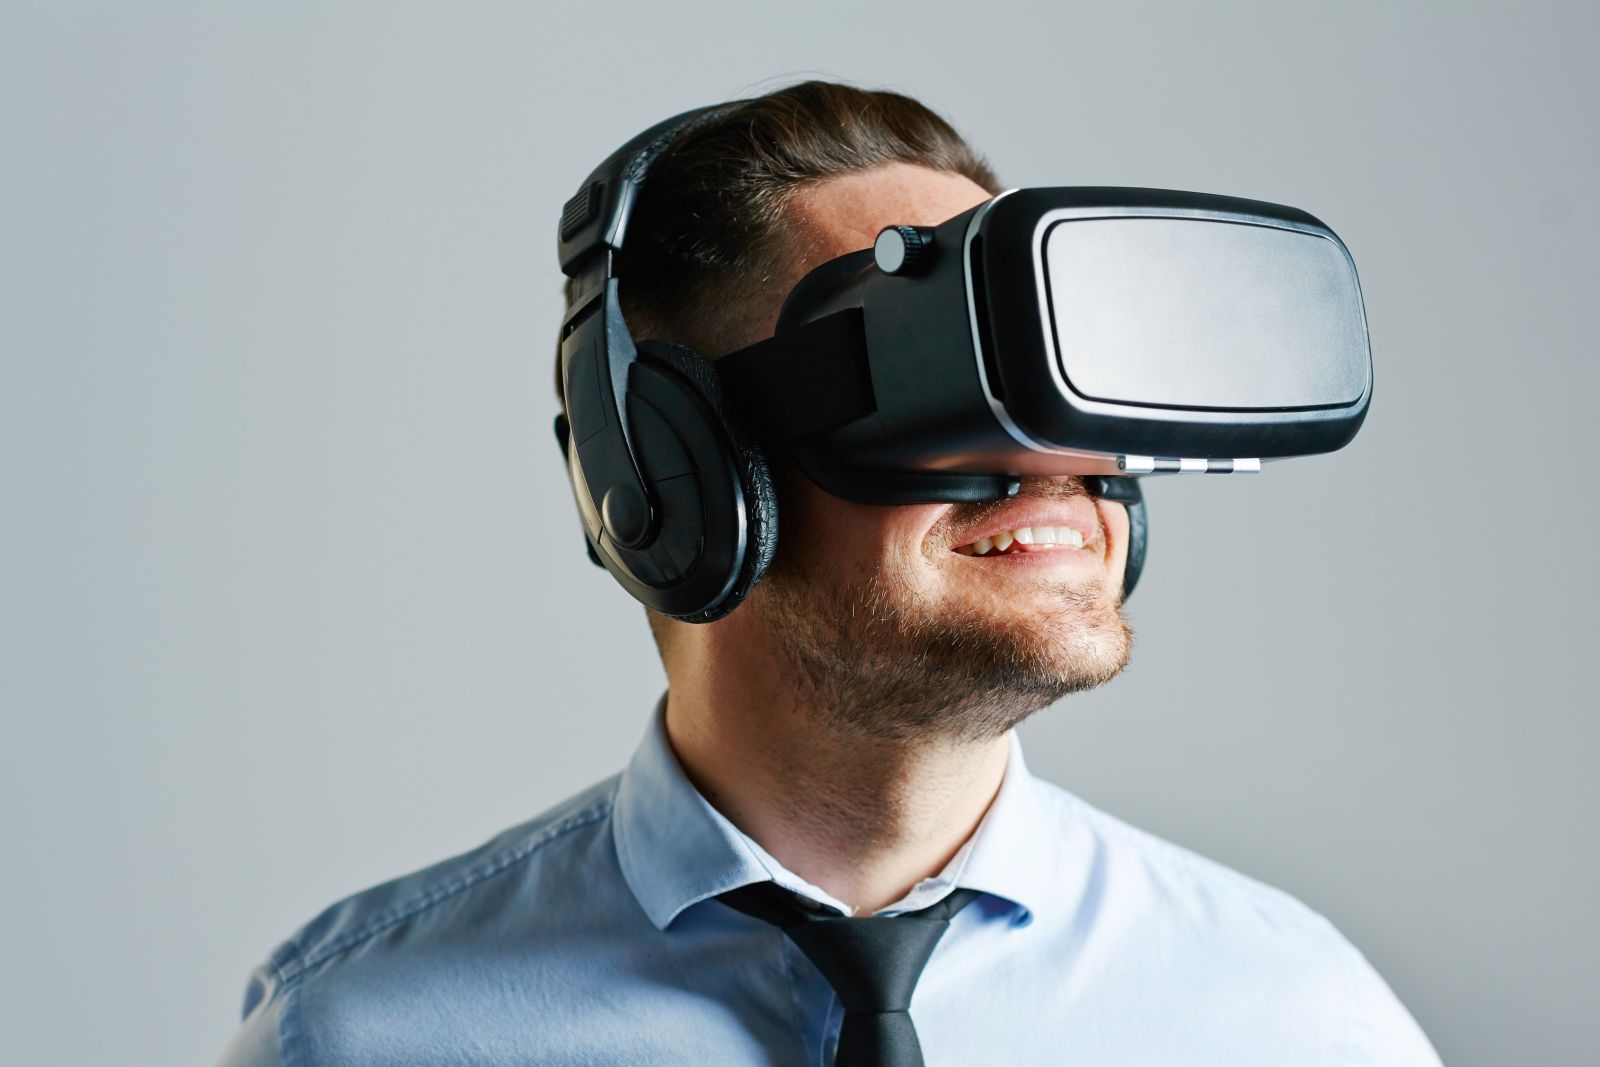 Man with VR headset and headphones on